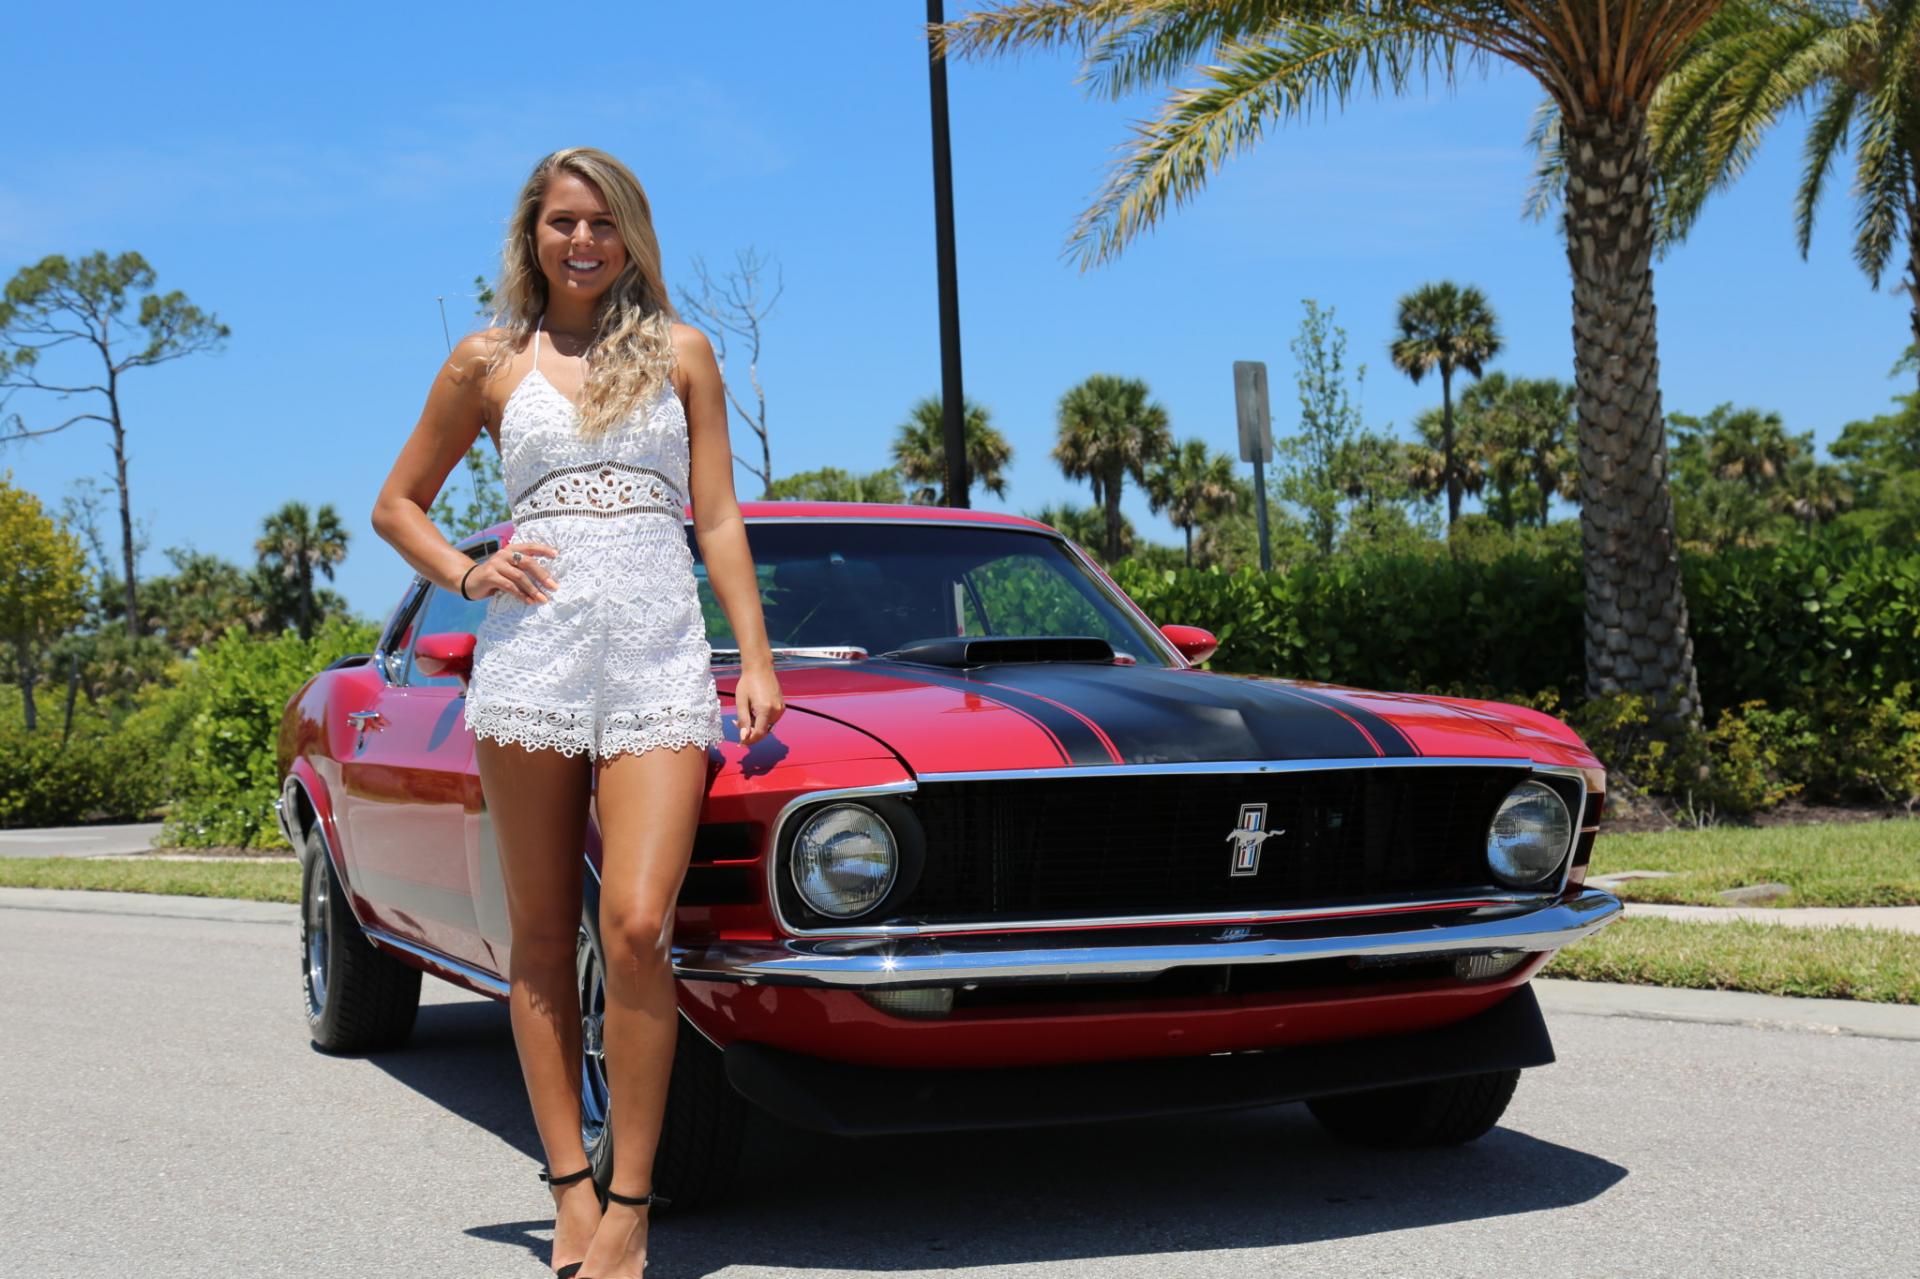 Used 1970 Ford Mustang 302 Boss for sale Sold at Muscle Cars for Sale Inc. in Fort Myers FL 33912 8